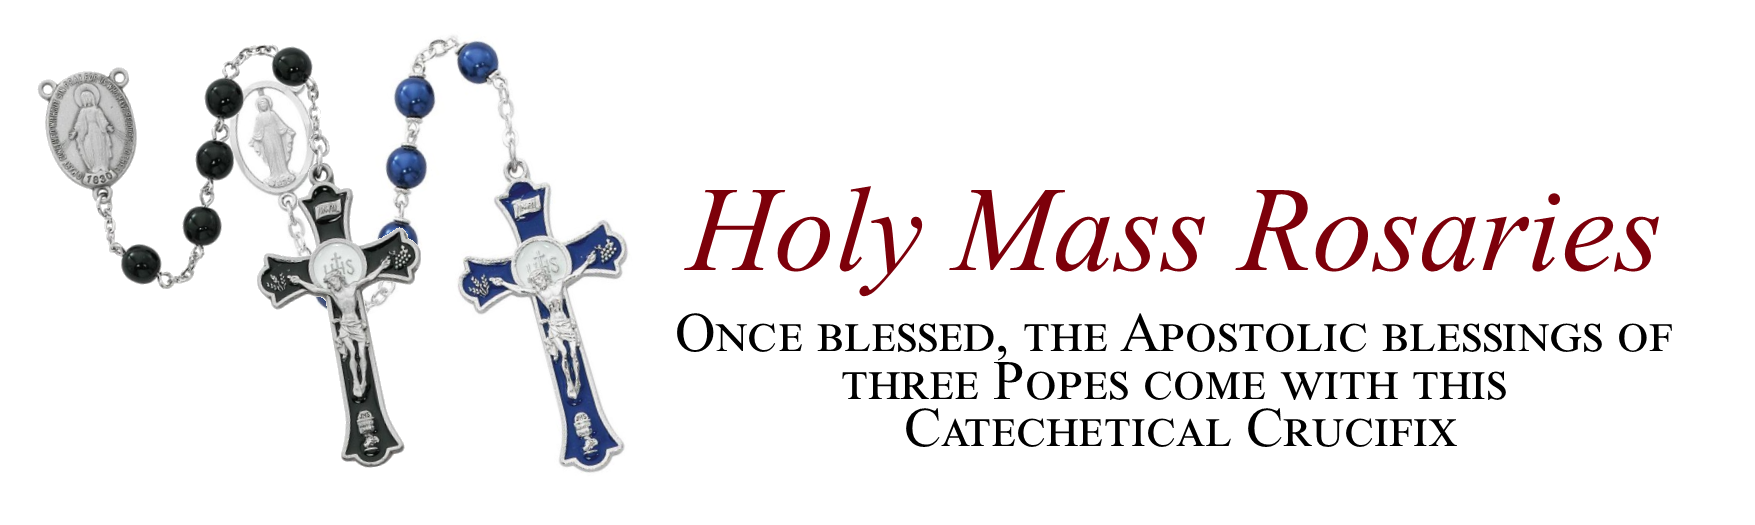 Holy Mass Rosaries